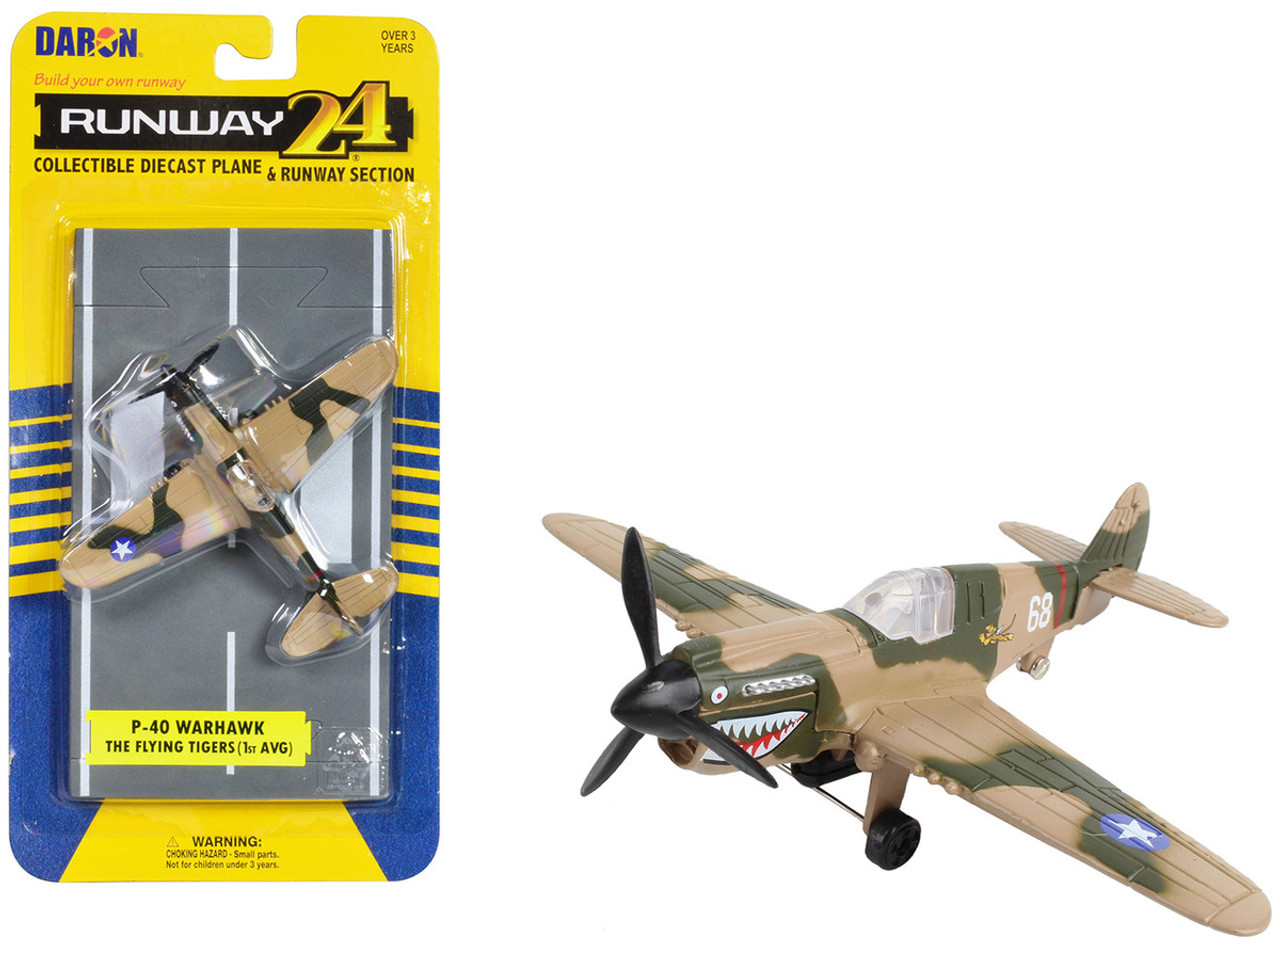 Curtiss P-40 Warhawk Fighter Aircraft Camouflage "Flying Tigers-First American Volunteer Group" with Runway Section Diecast Model Airplane by Runway24